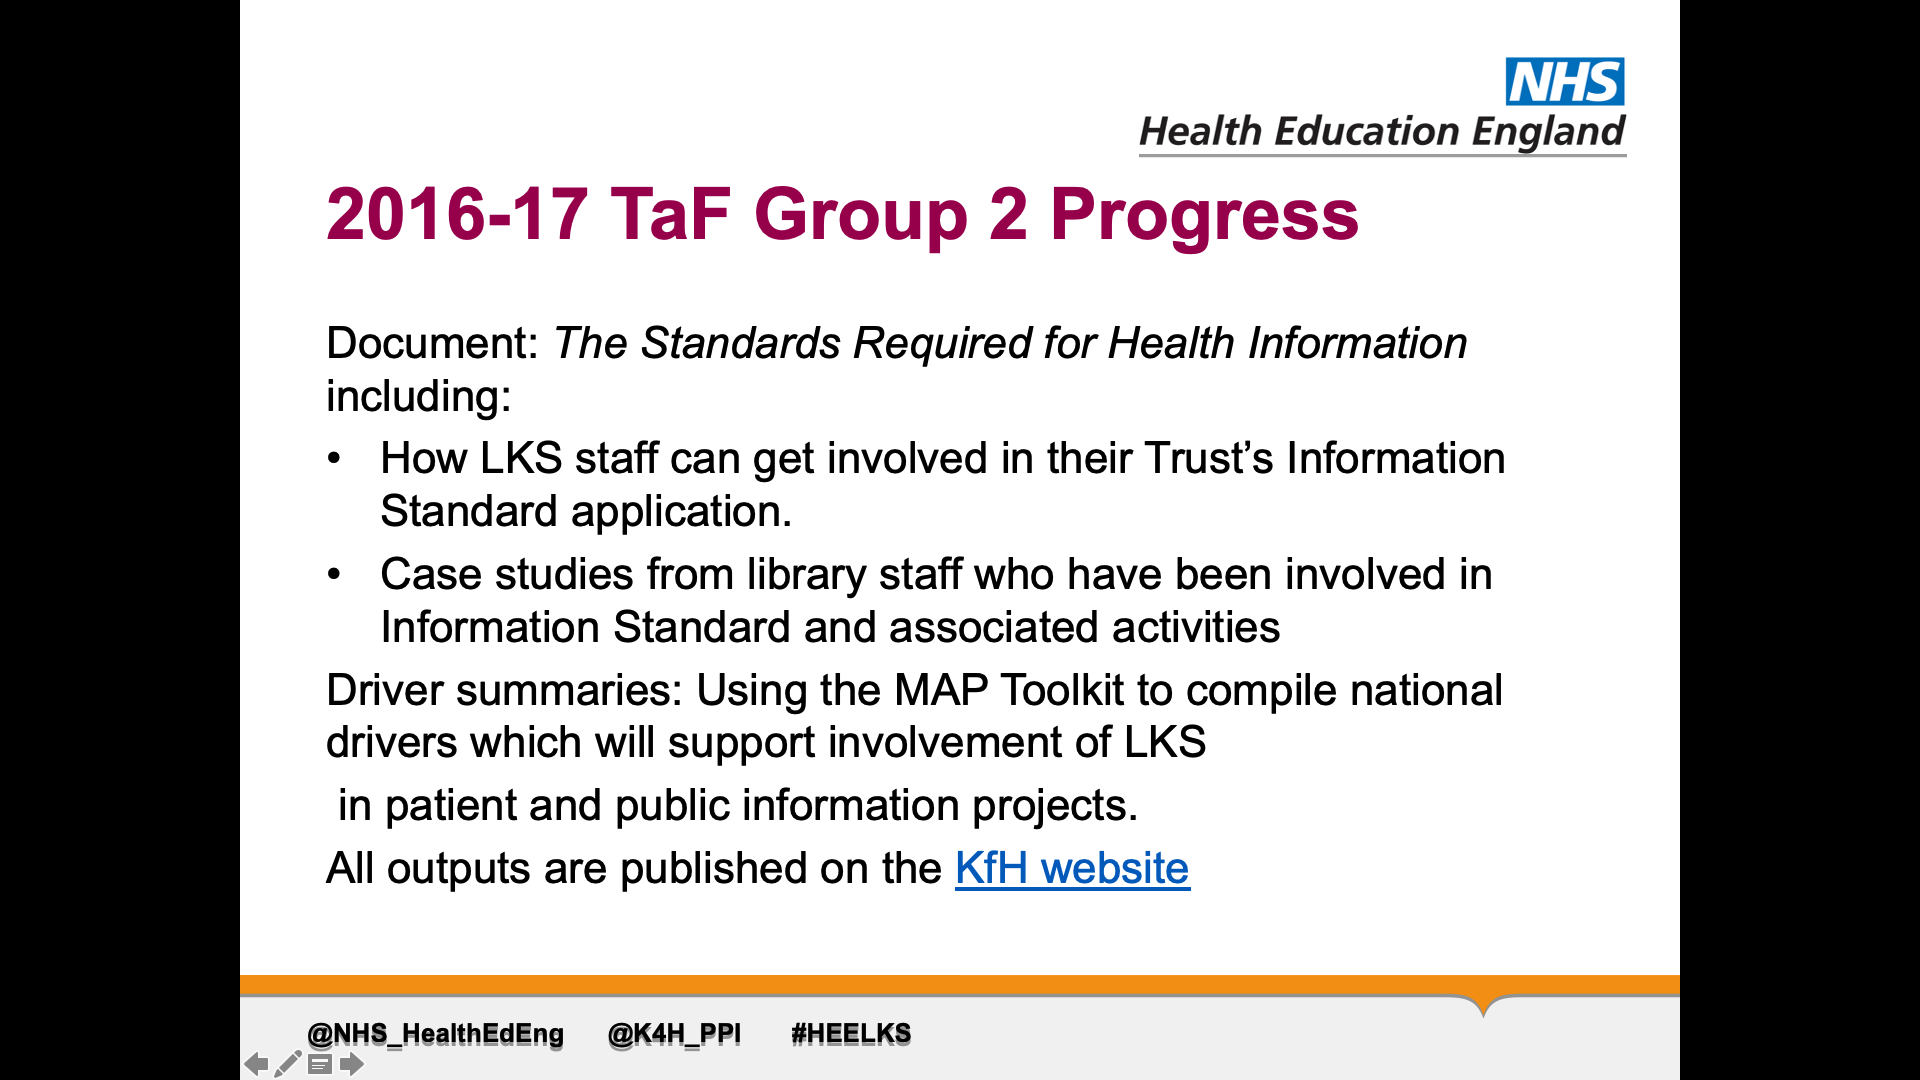 Title: 2016-17 TaF Group 2 Progress. Text on page: Document: The Standards Required for Health Information including: How LKS staff can get involved in their Trust’s Information Standard application. Case studies from library staff who have been involved in Information Standard and associated activities Driver summaries: Using the MAP Toolkit to compile national drivers which will support involvement of LKS  in patient and public information projects.  All outputs are published on the KfH website